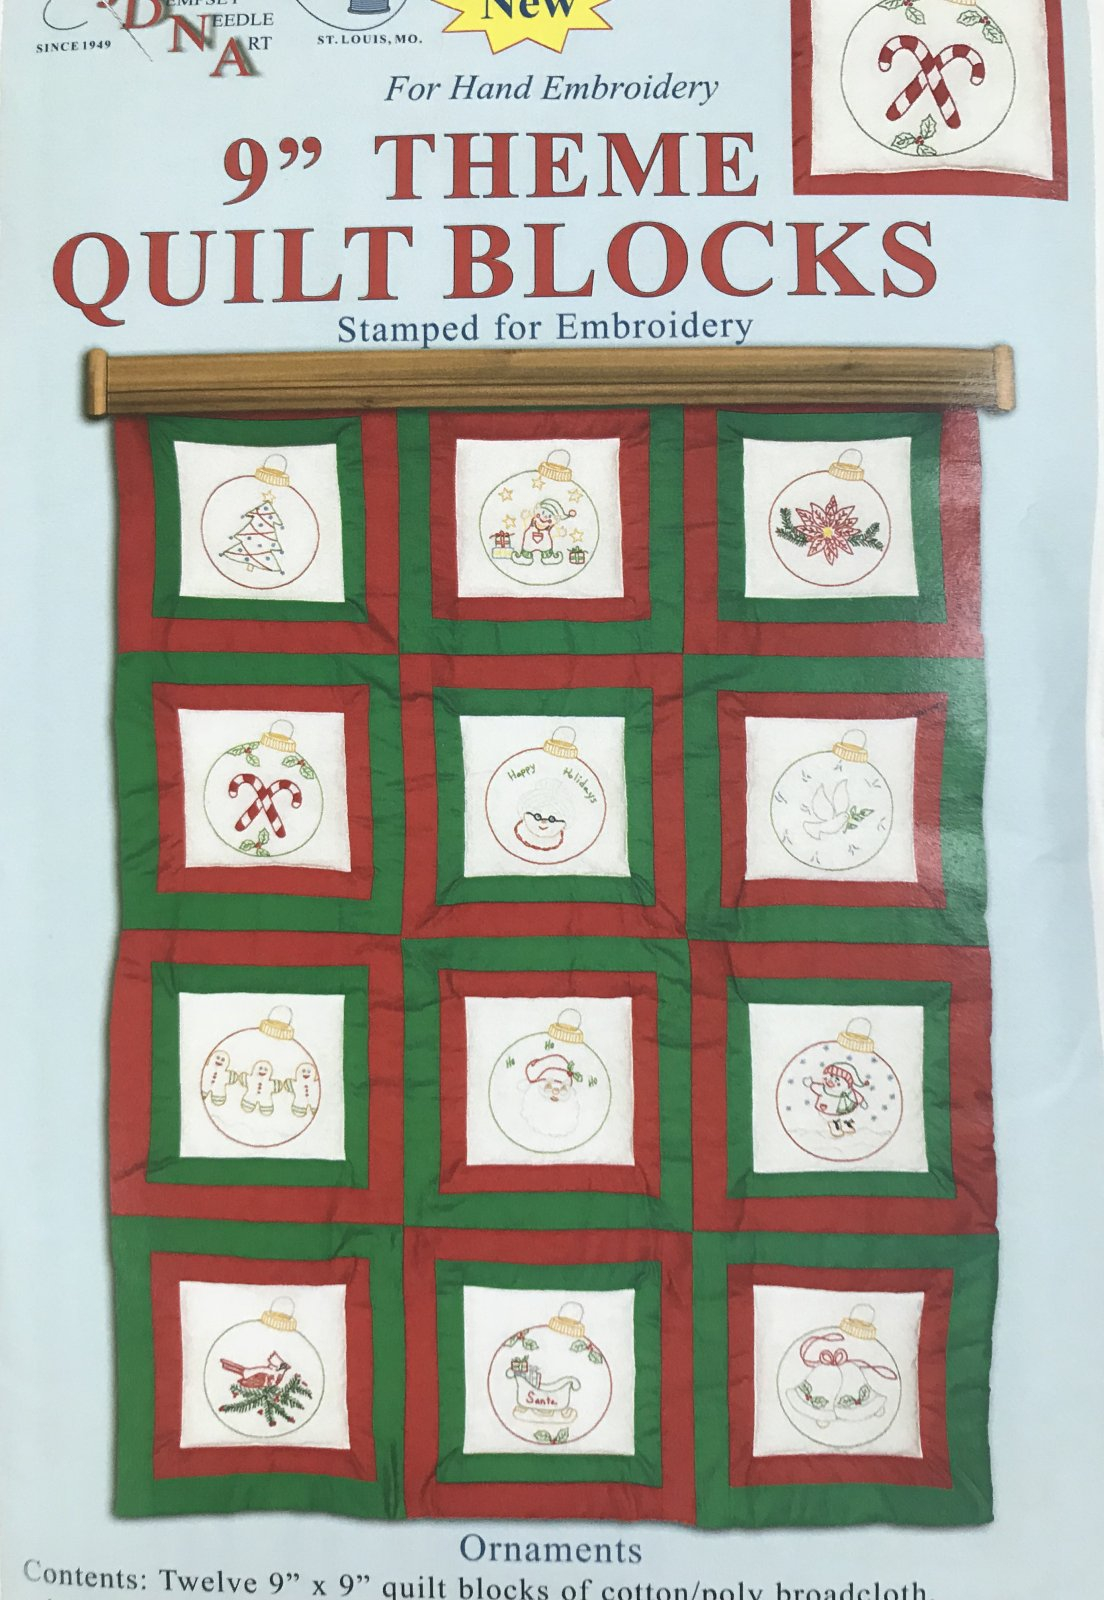 Hand Embroidery Quilt Patterns 9 Quilt Blocks Stamped For Hand Embroidery Xmas Ornaments